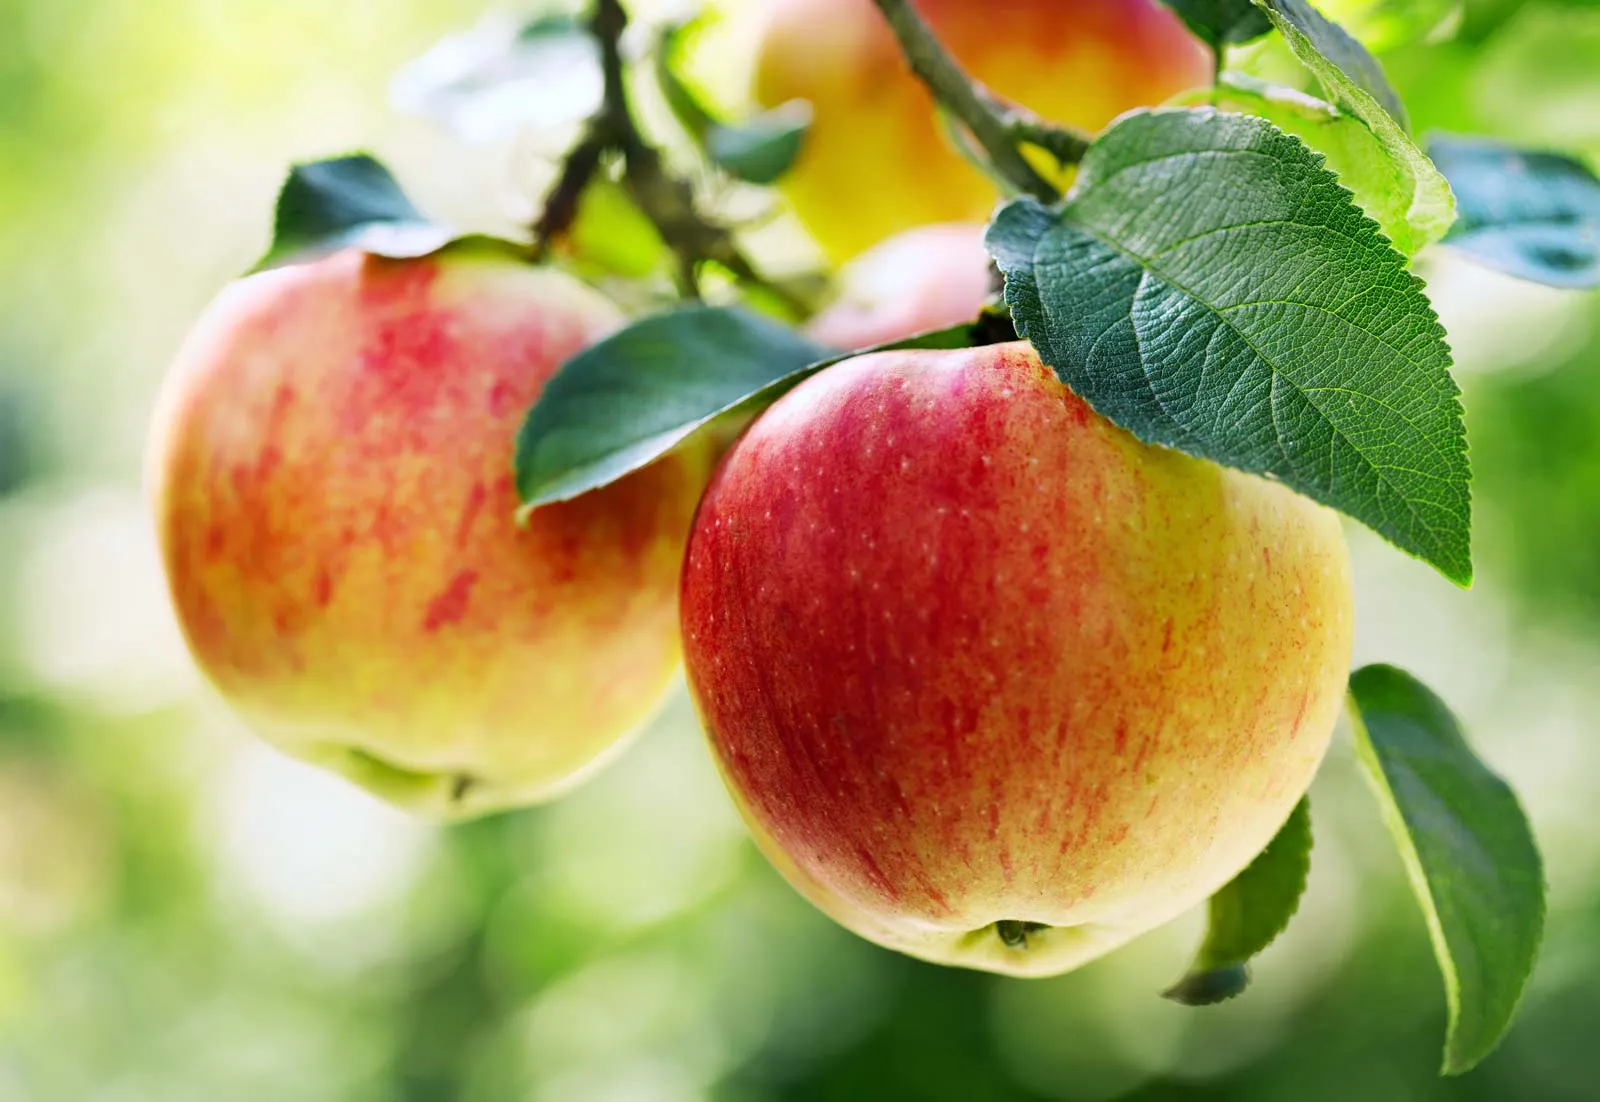 How To Plant Apple Seeds